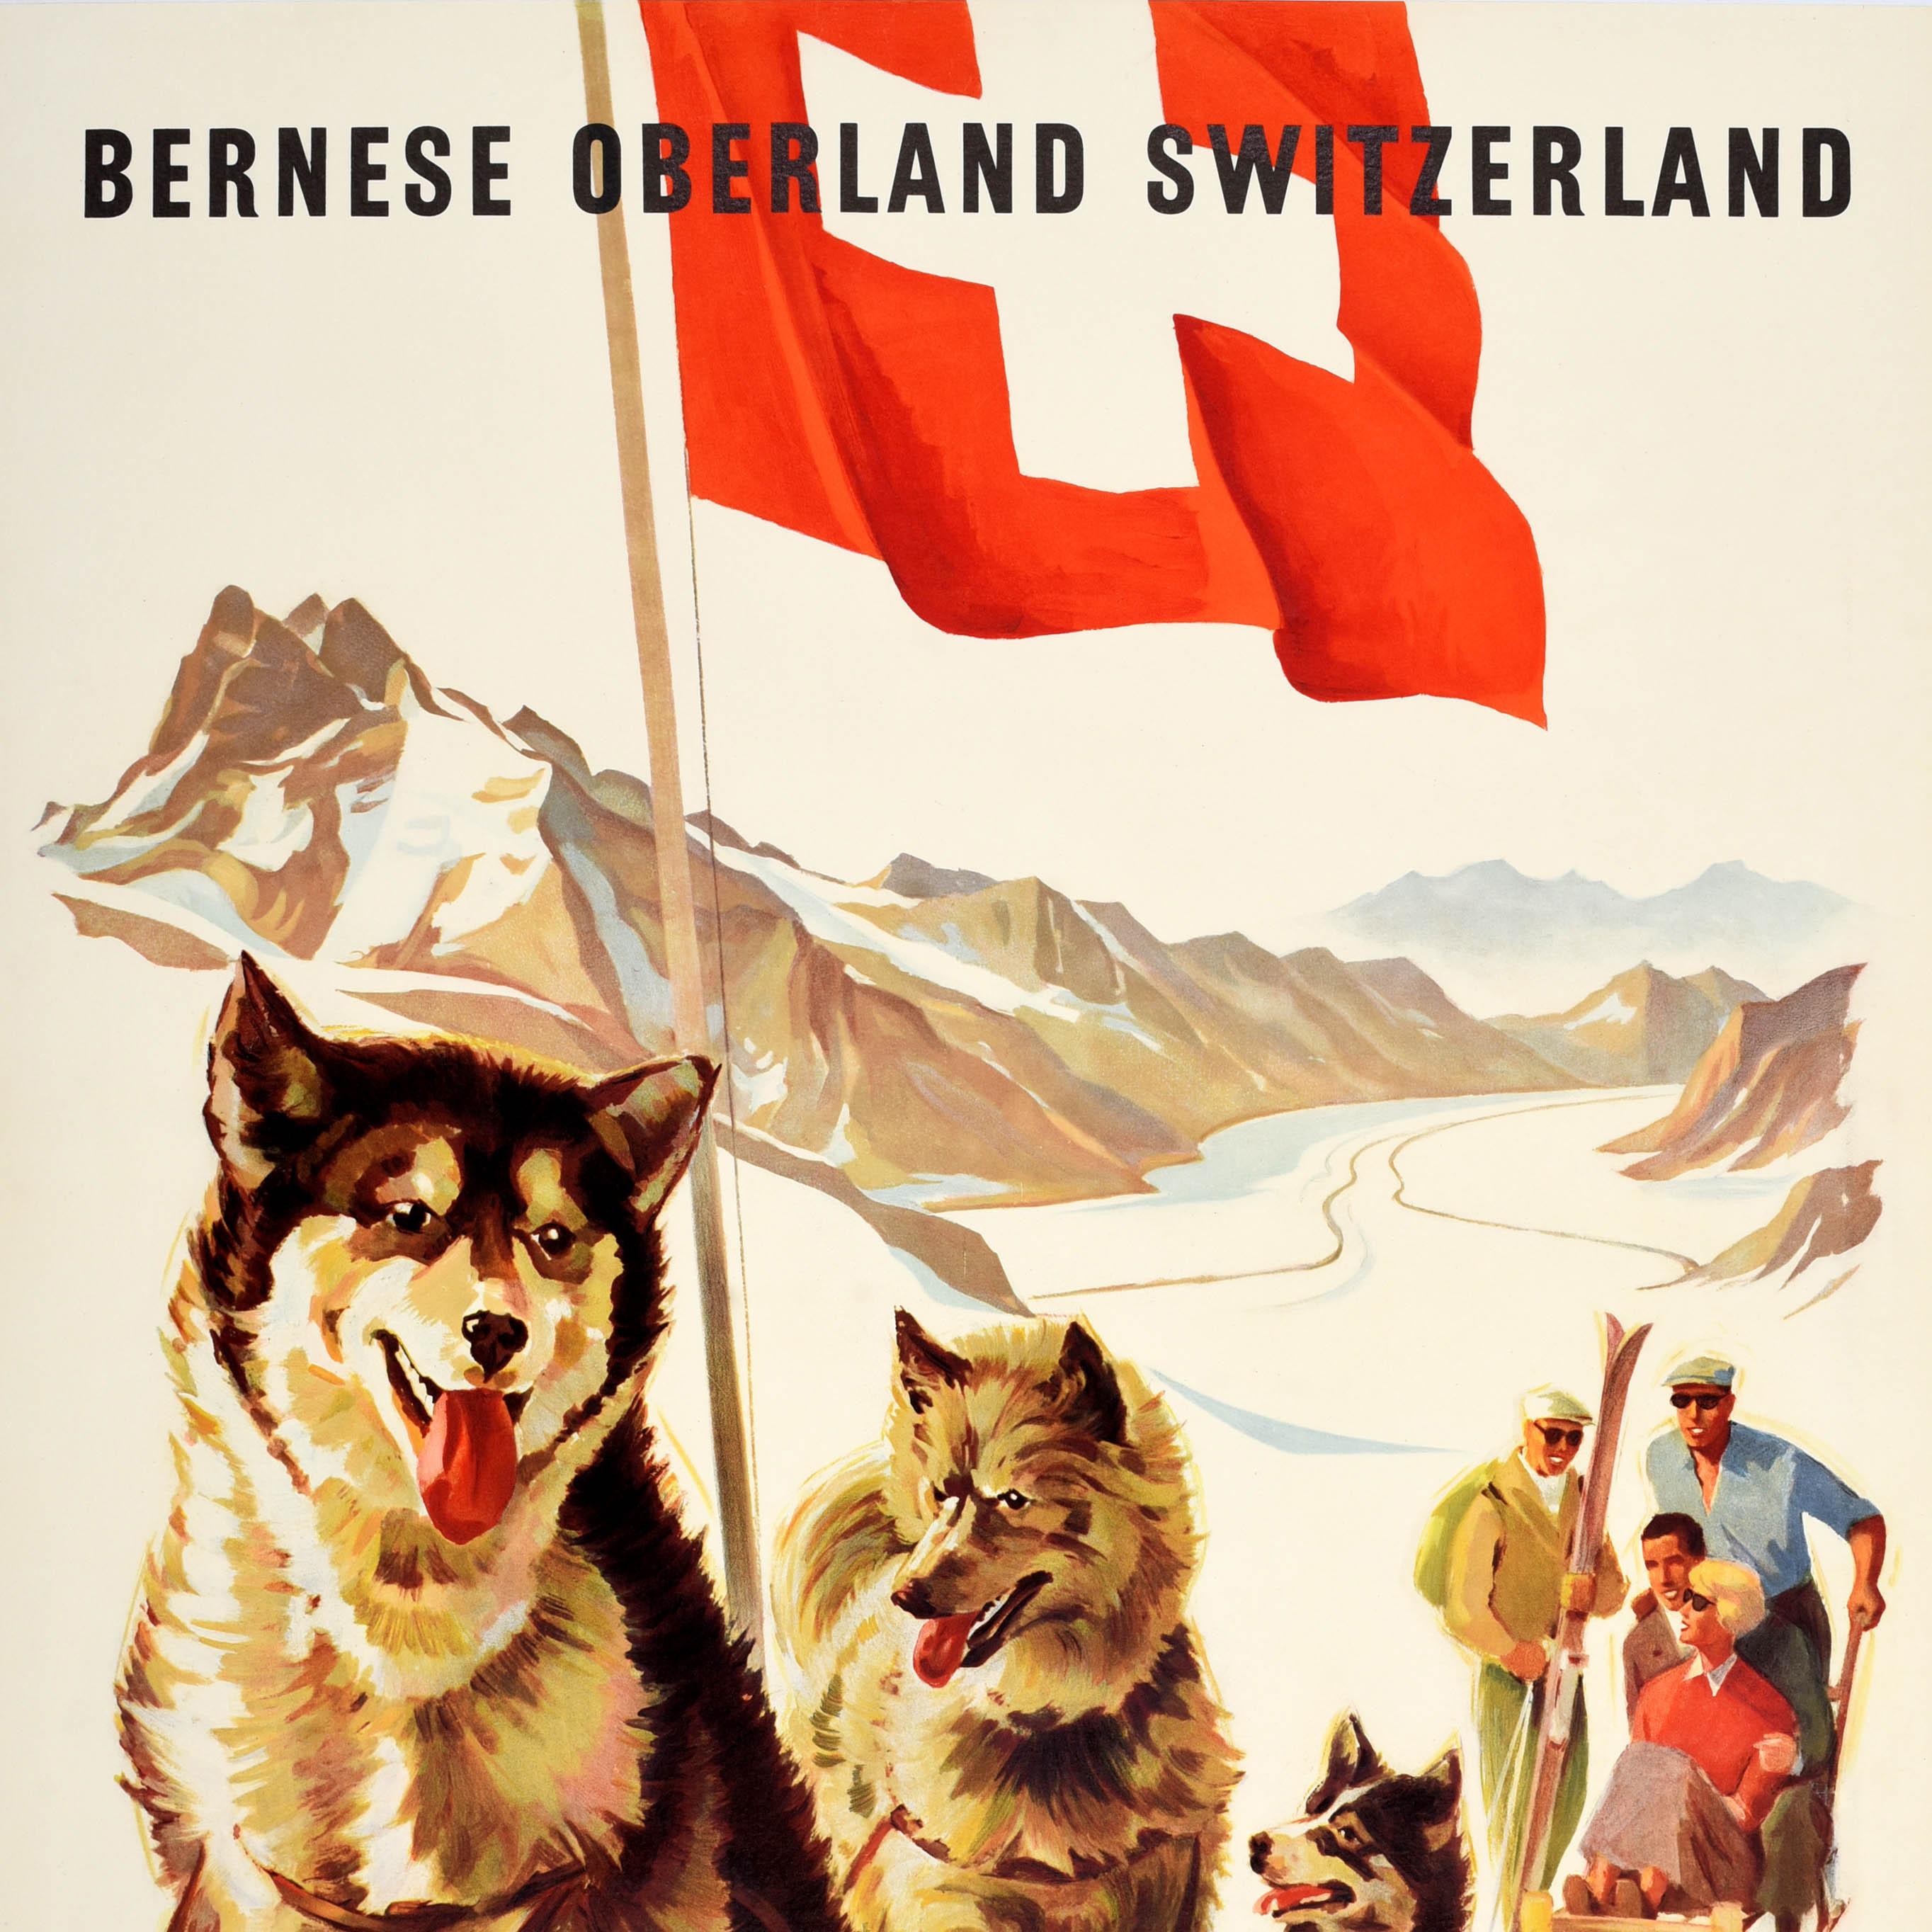 Original vintage winter sport and skiing travel poster - Bernese Oberland Switzerland Jungfraujoch Jungfrau Railway - great artwork titled Polar Dogs featuring huskies harnessed to a sled with a lady and man sitting on the sledge preparing to ride